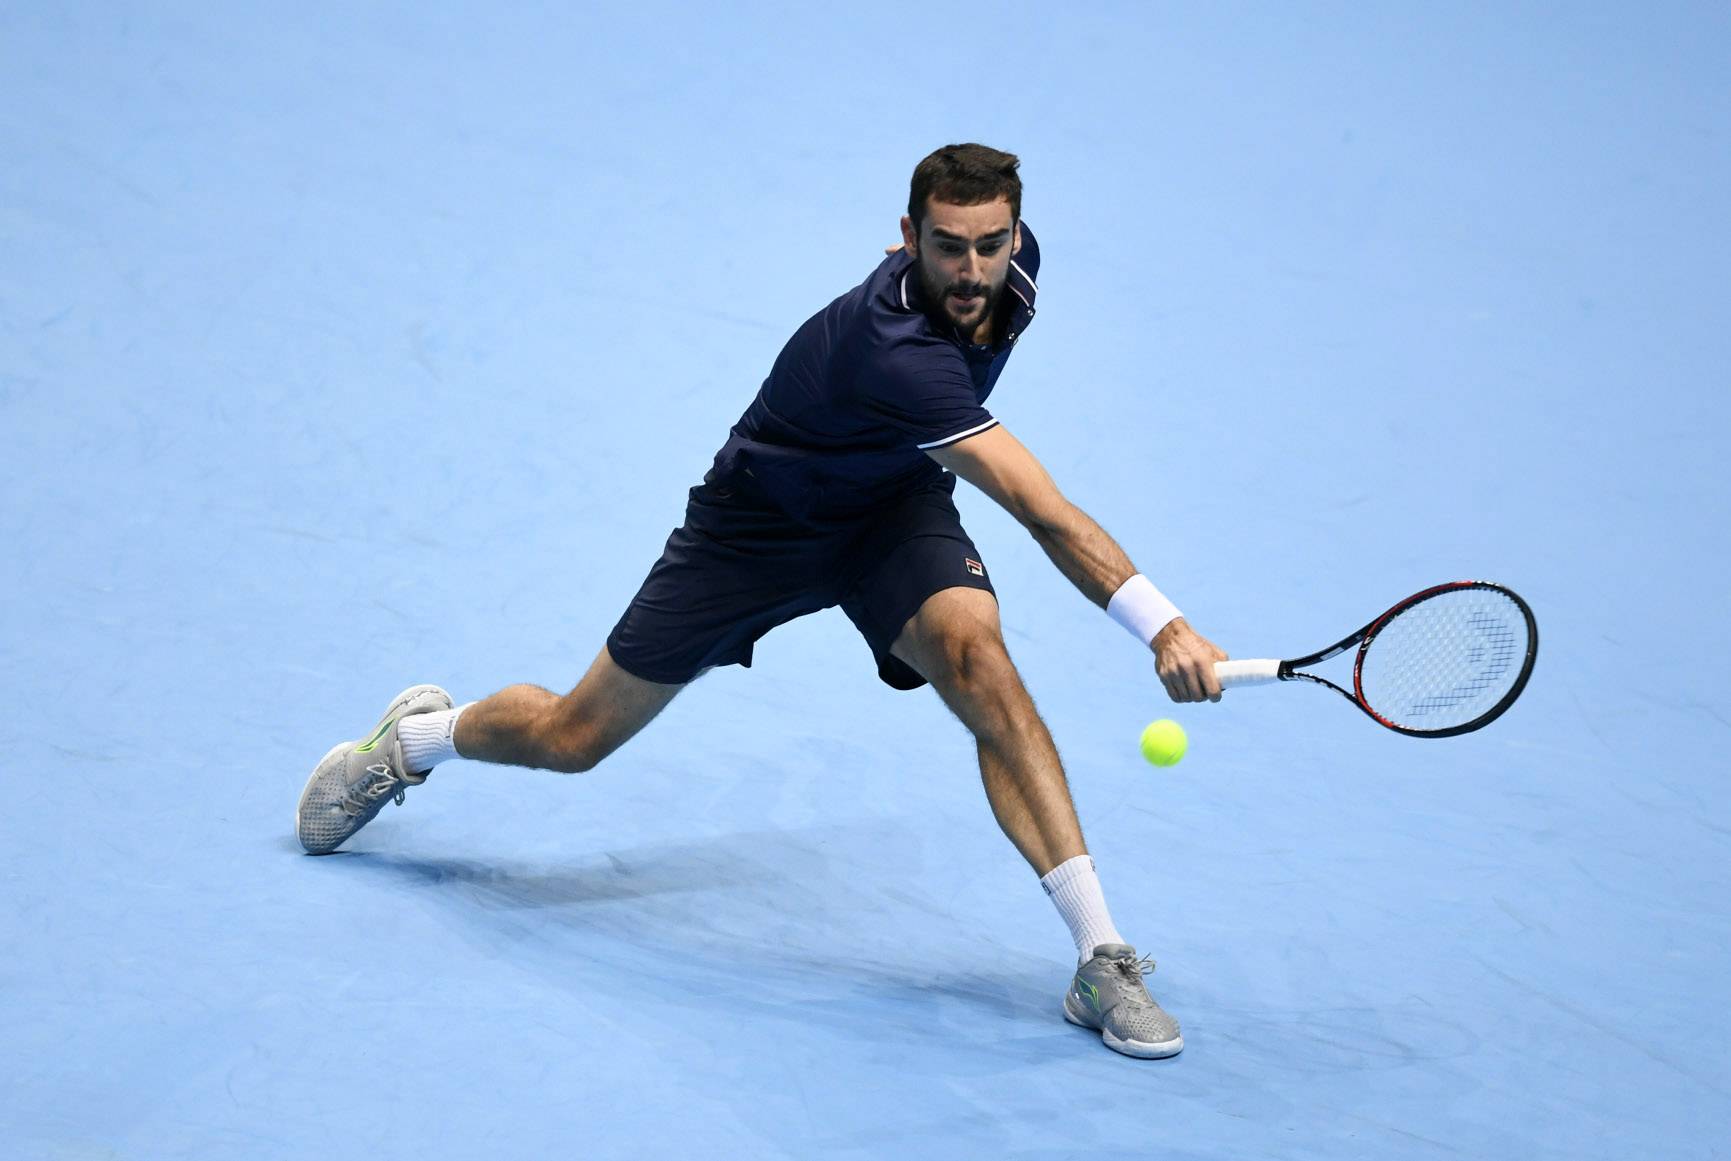 Croatia's Marin Cilic in action during his round robin match with Switzerland's Stanislas Wawrinka